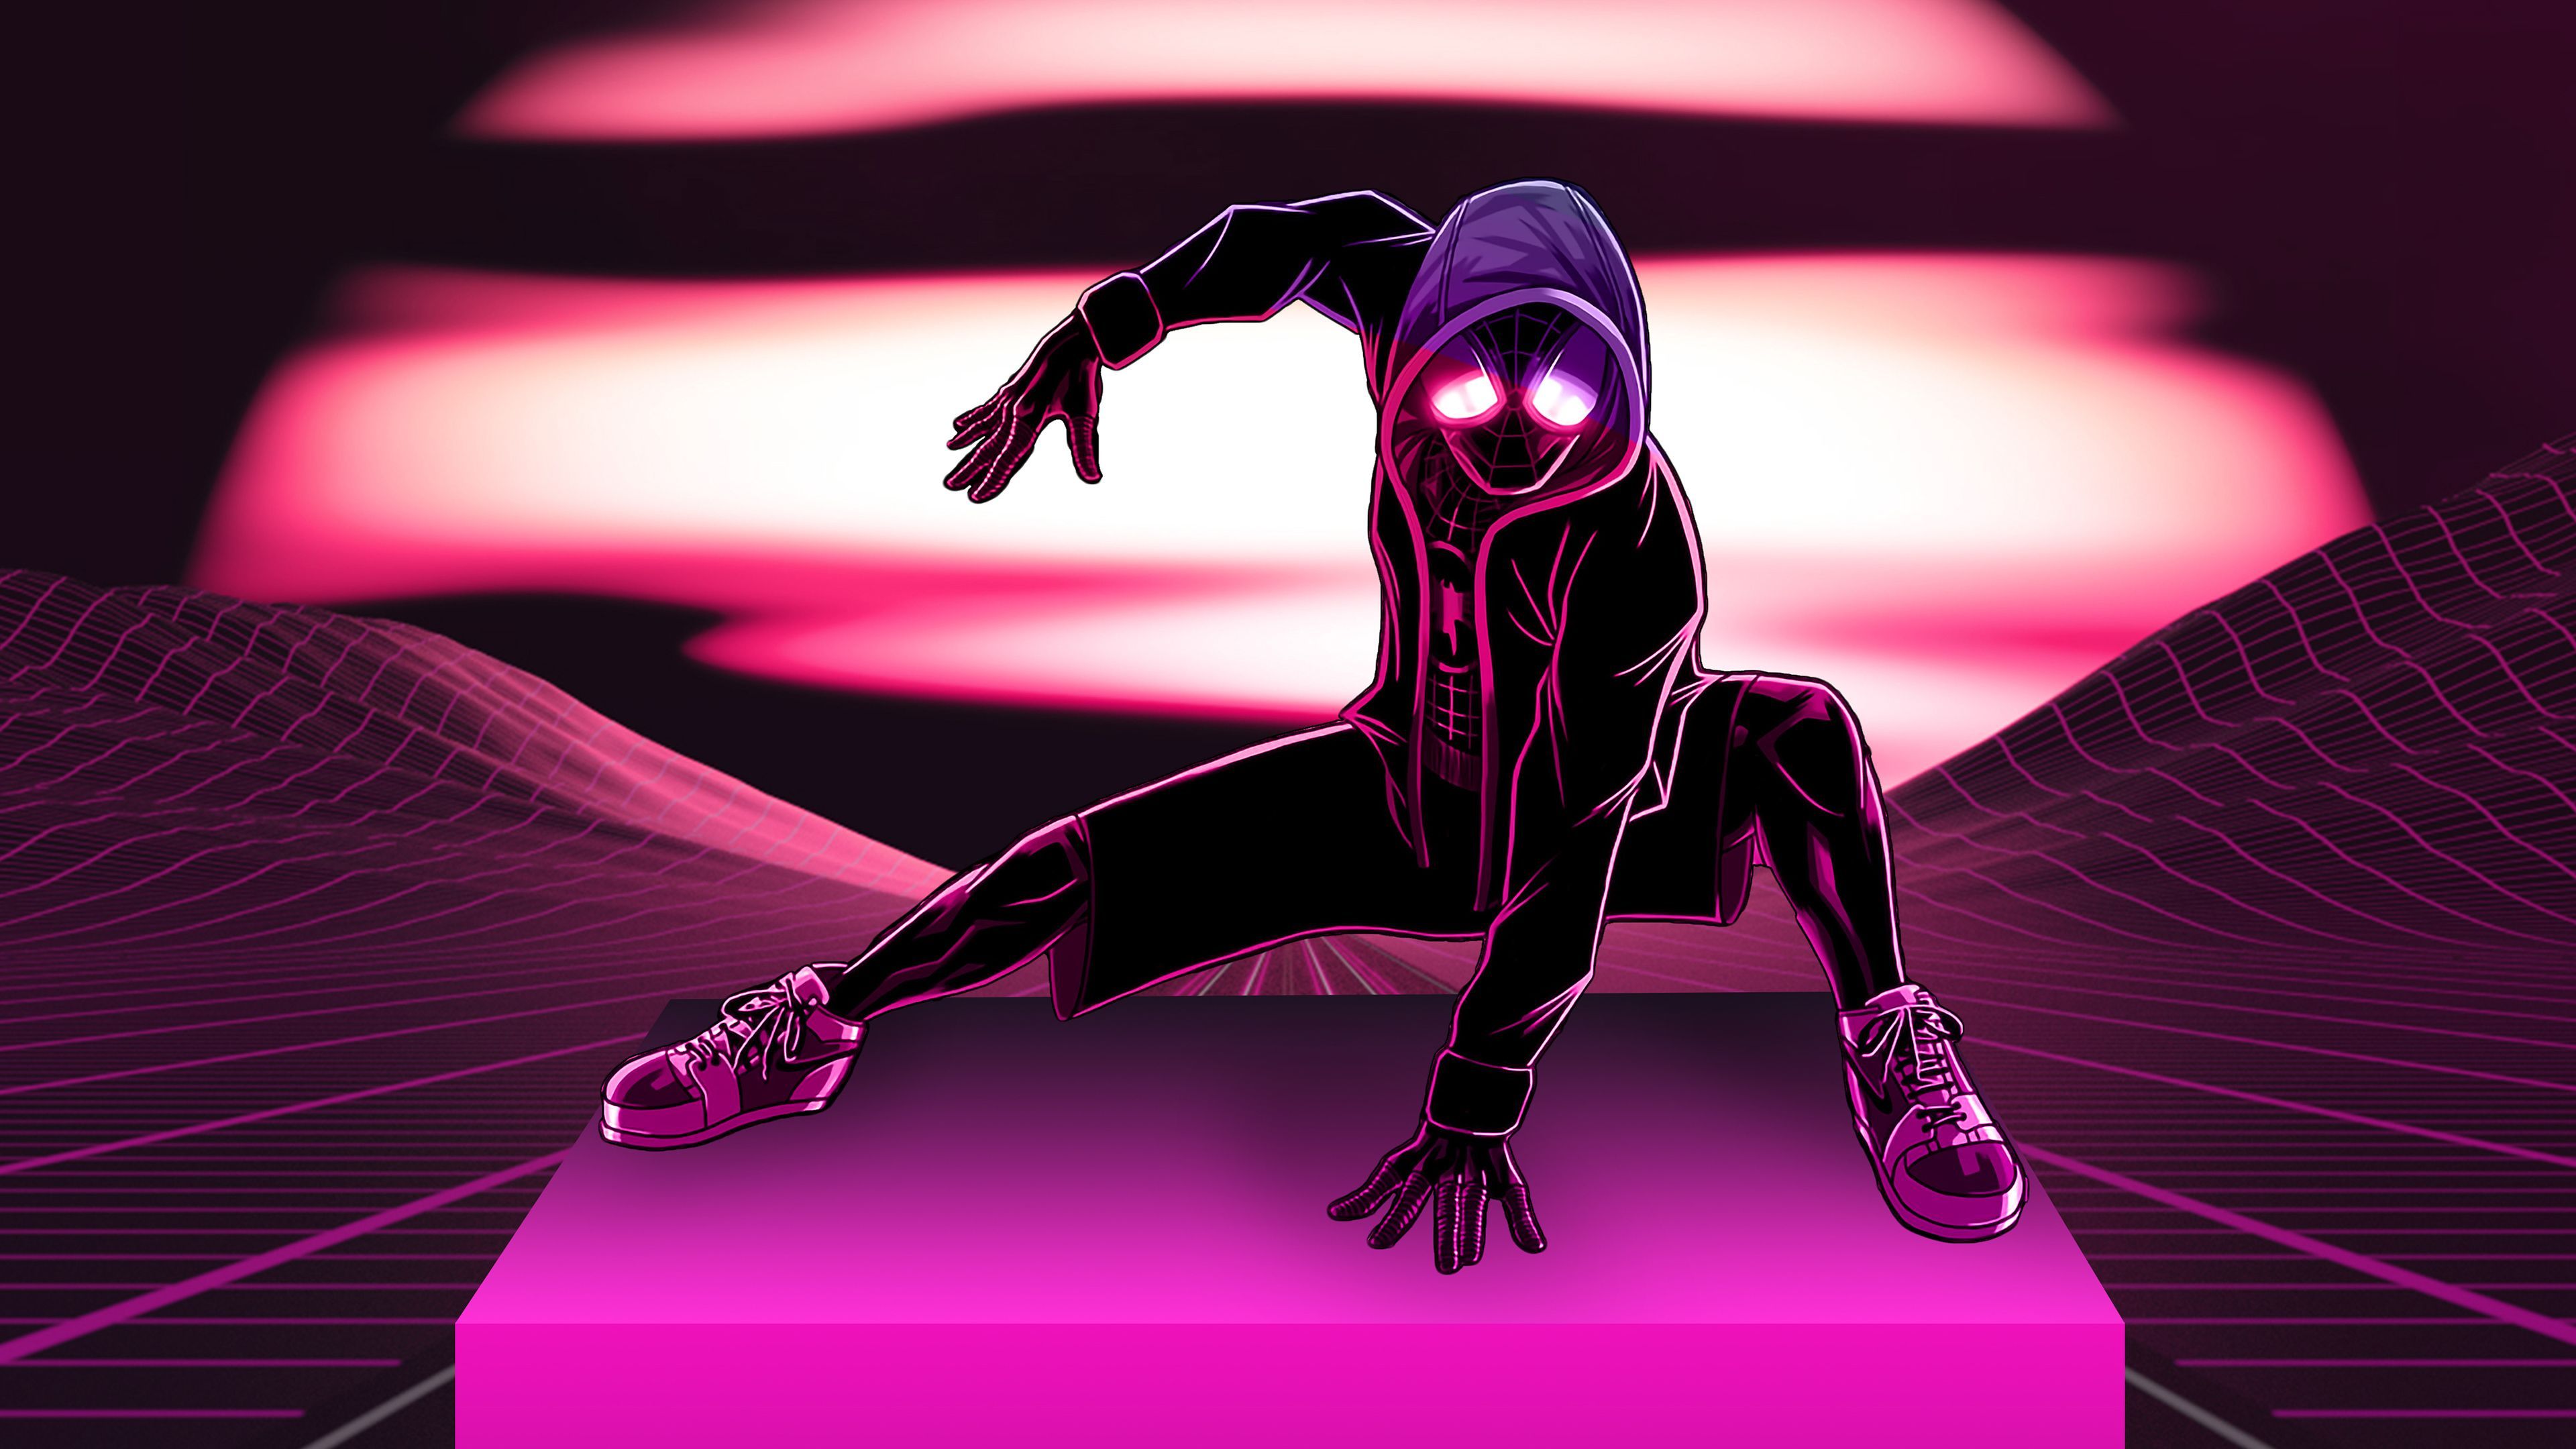 Spider Man Neon Hd Superheroes 4k Wallpapers Images Backgrounds Images